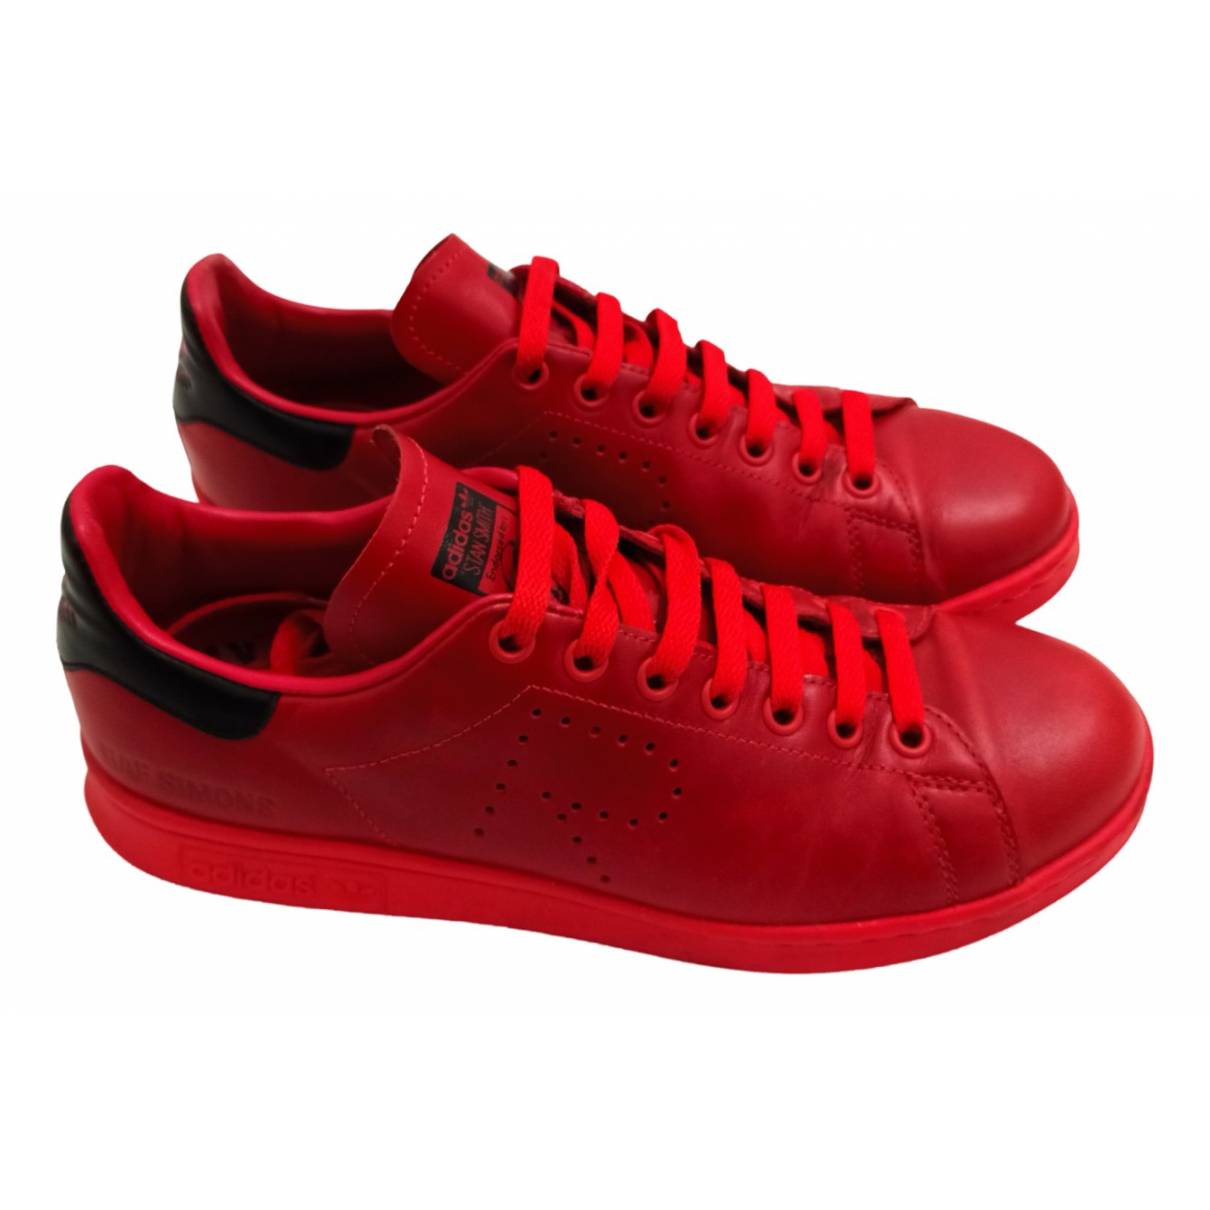 Stan smith leather low trainers Adidas x Raf Simons Red size 7.5 UK in  Leather - 18619755